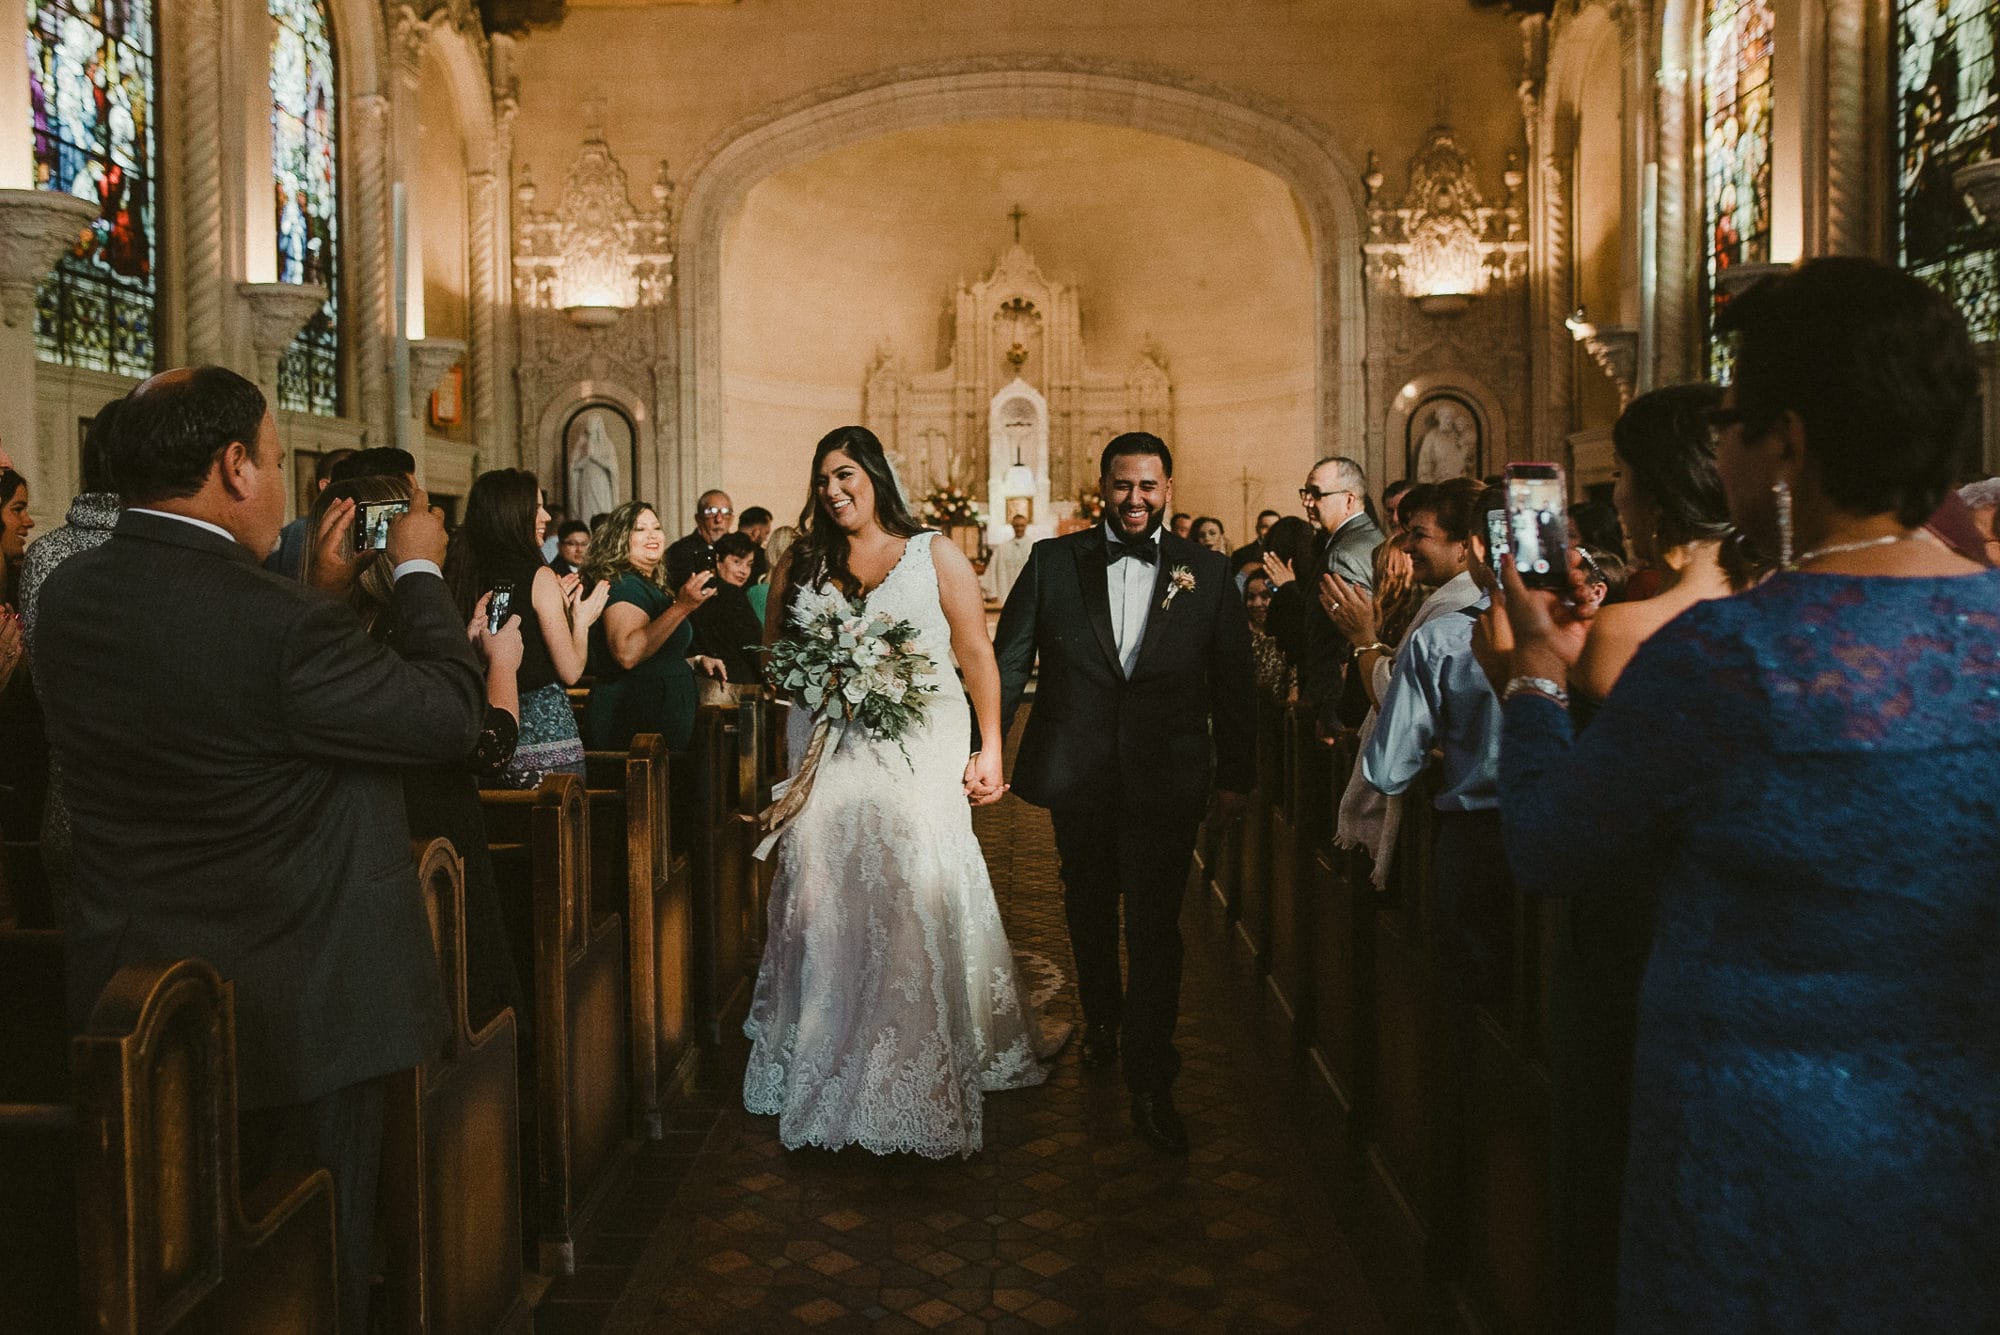 10 Steps to Live Stream your Wedding For Free